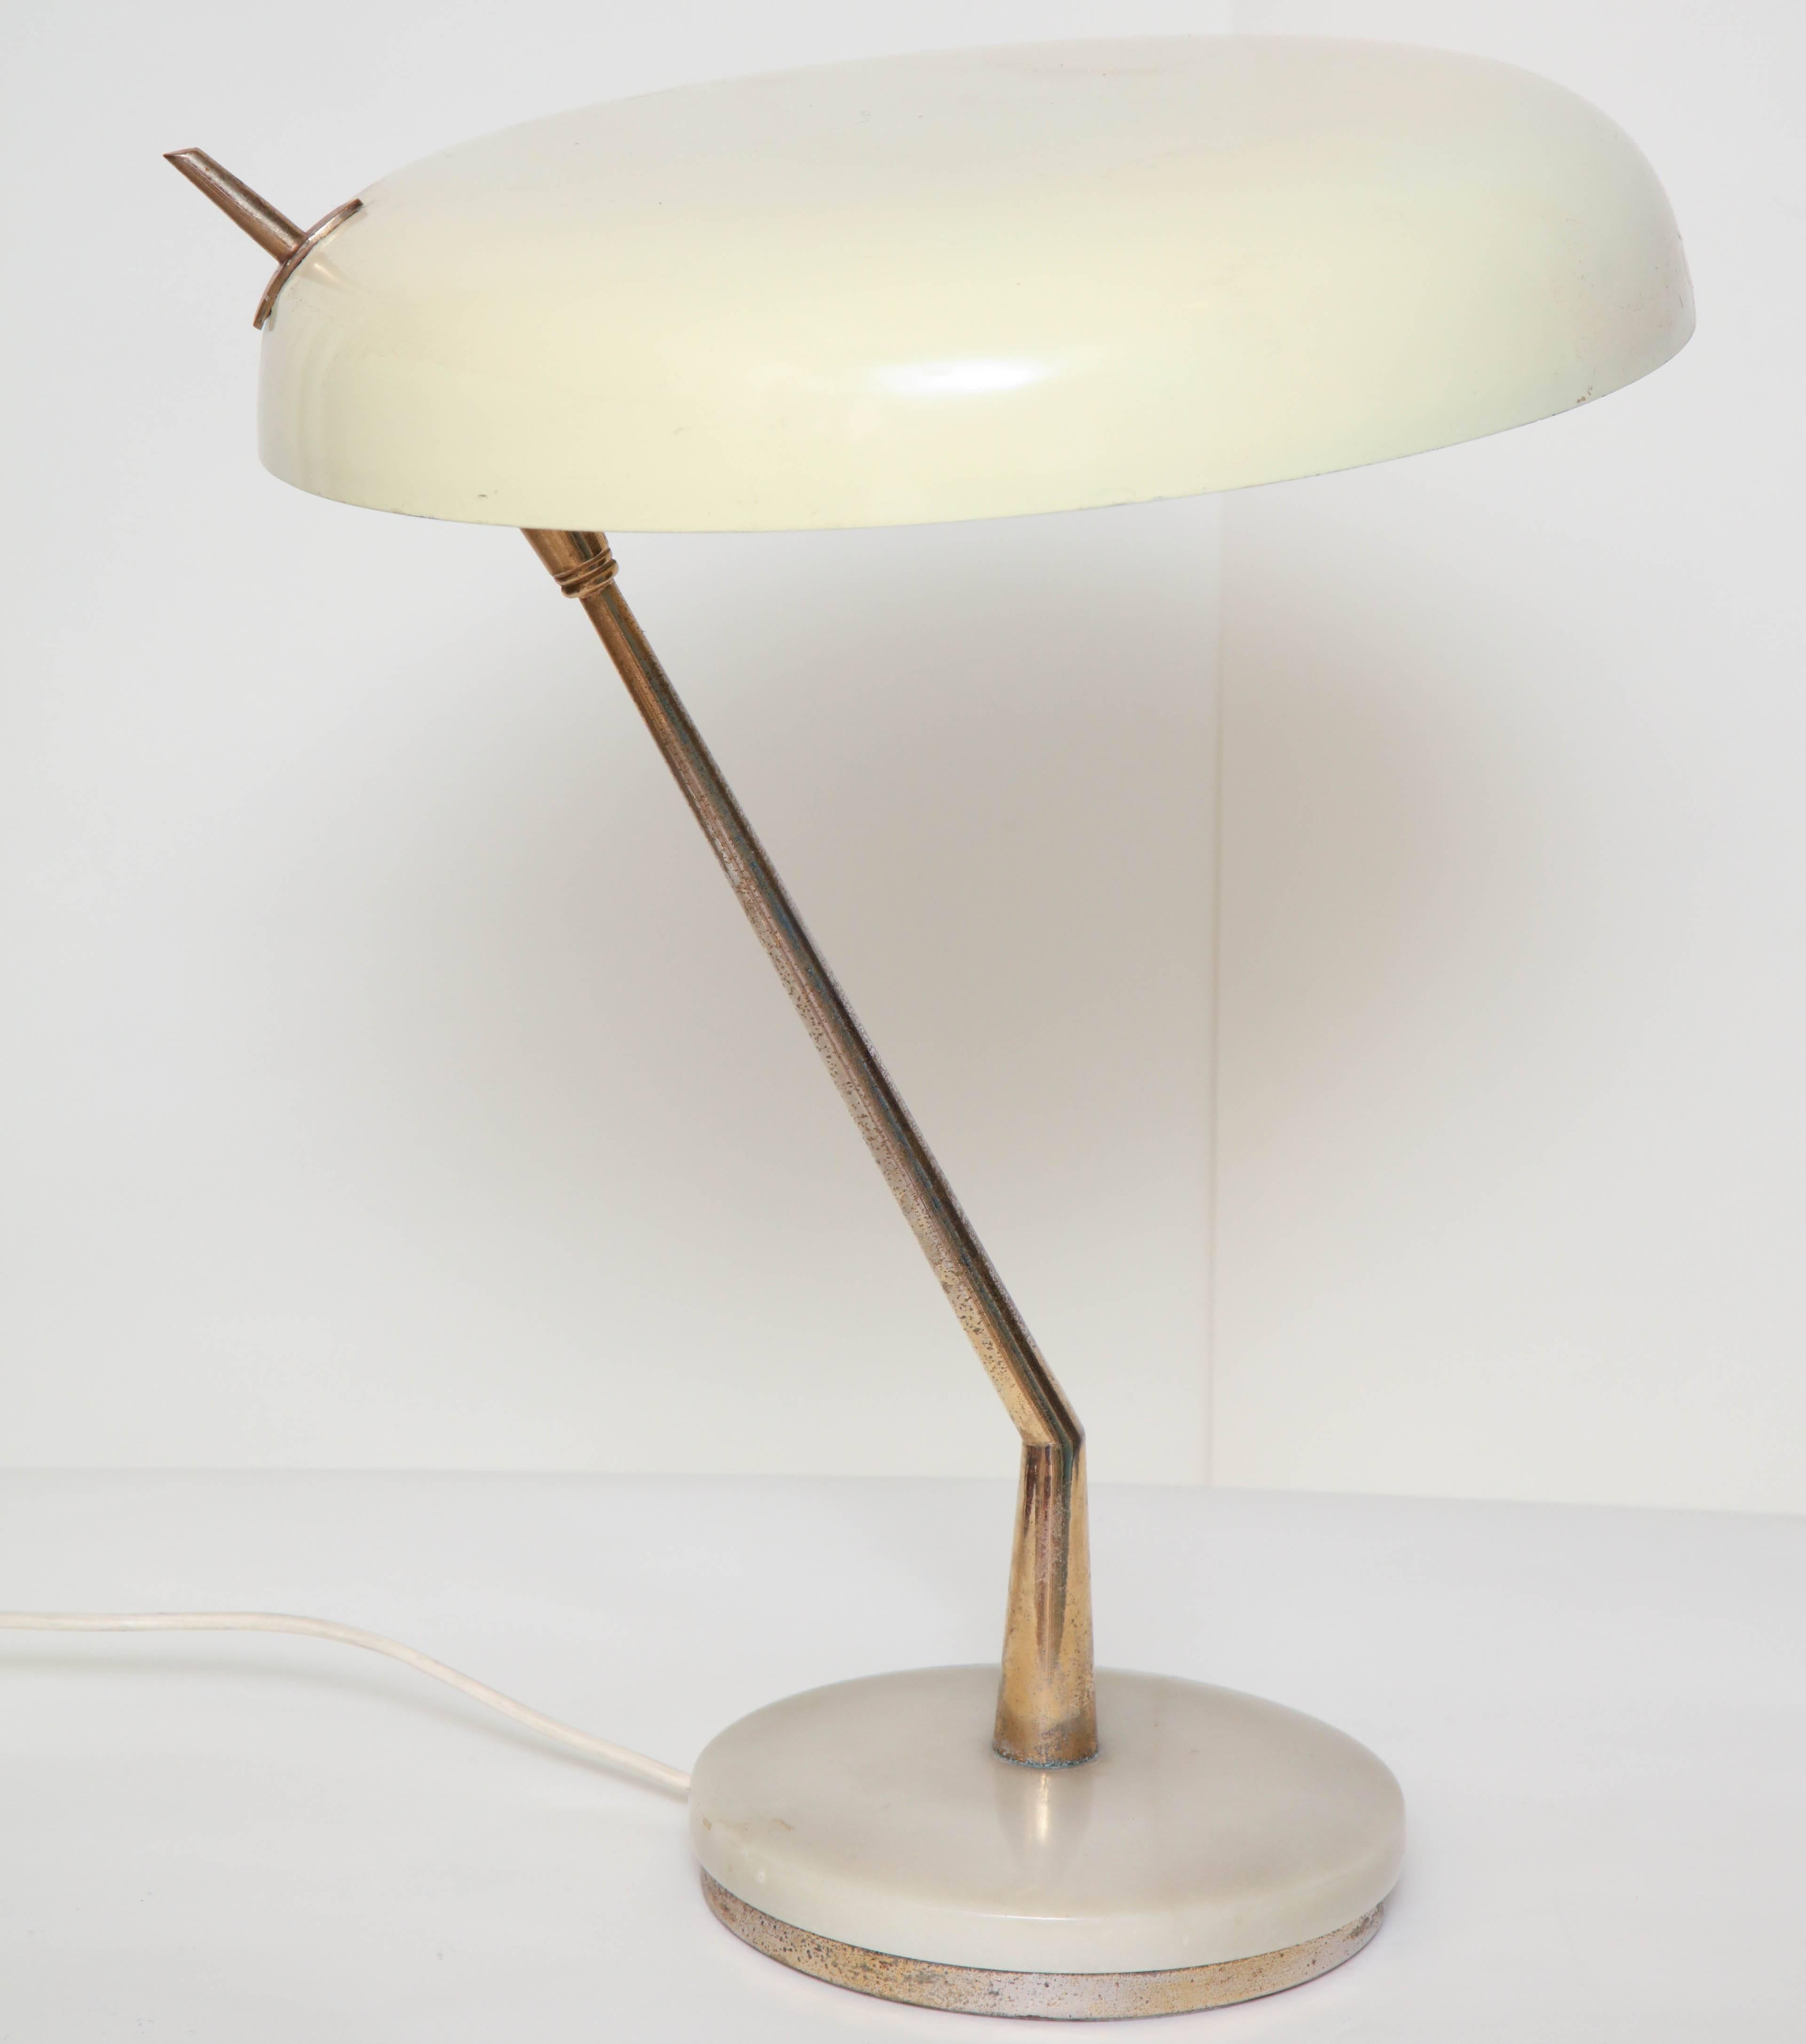 Painted Articulated Table Lamp Attributed to Arredoluce Italian Mid-Century Modern, 1950